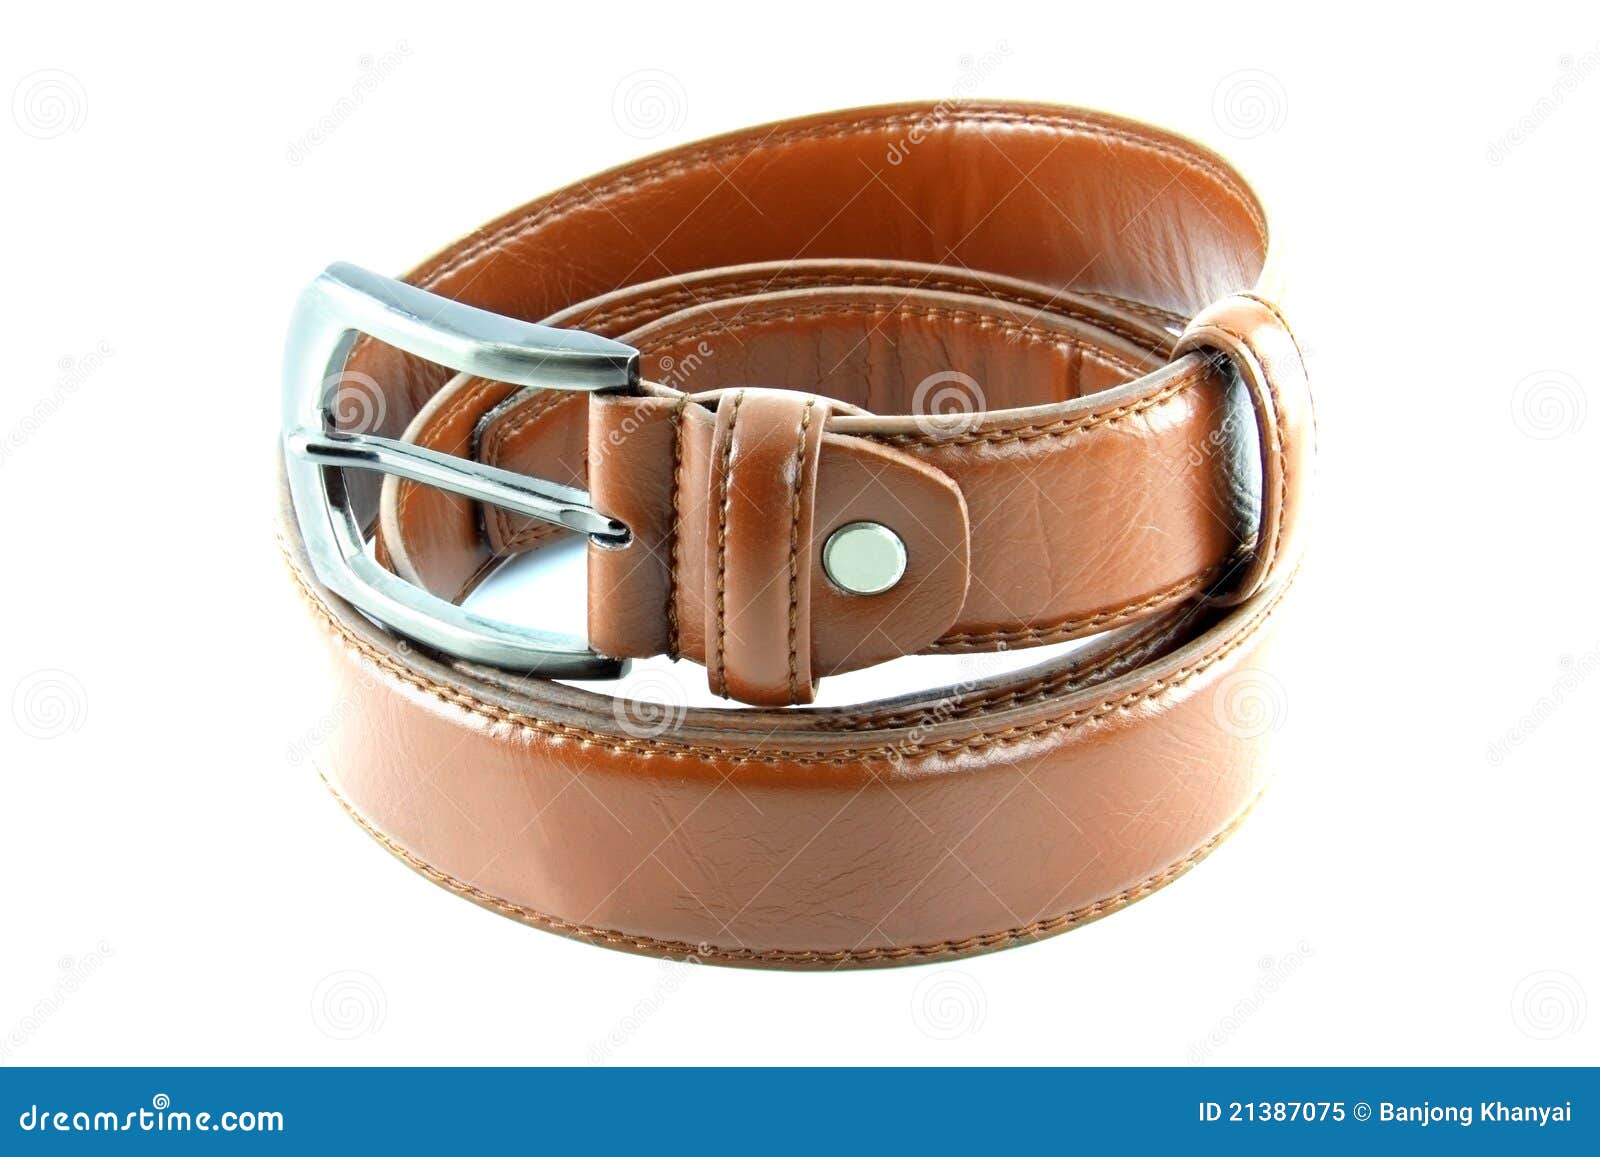 Brown men s fashion belt stock image. Image of abstract - 21387075